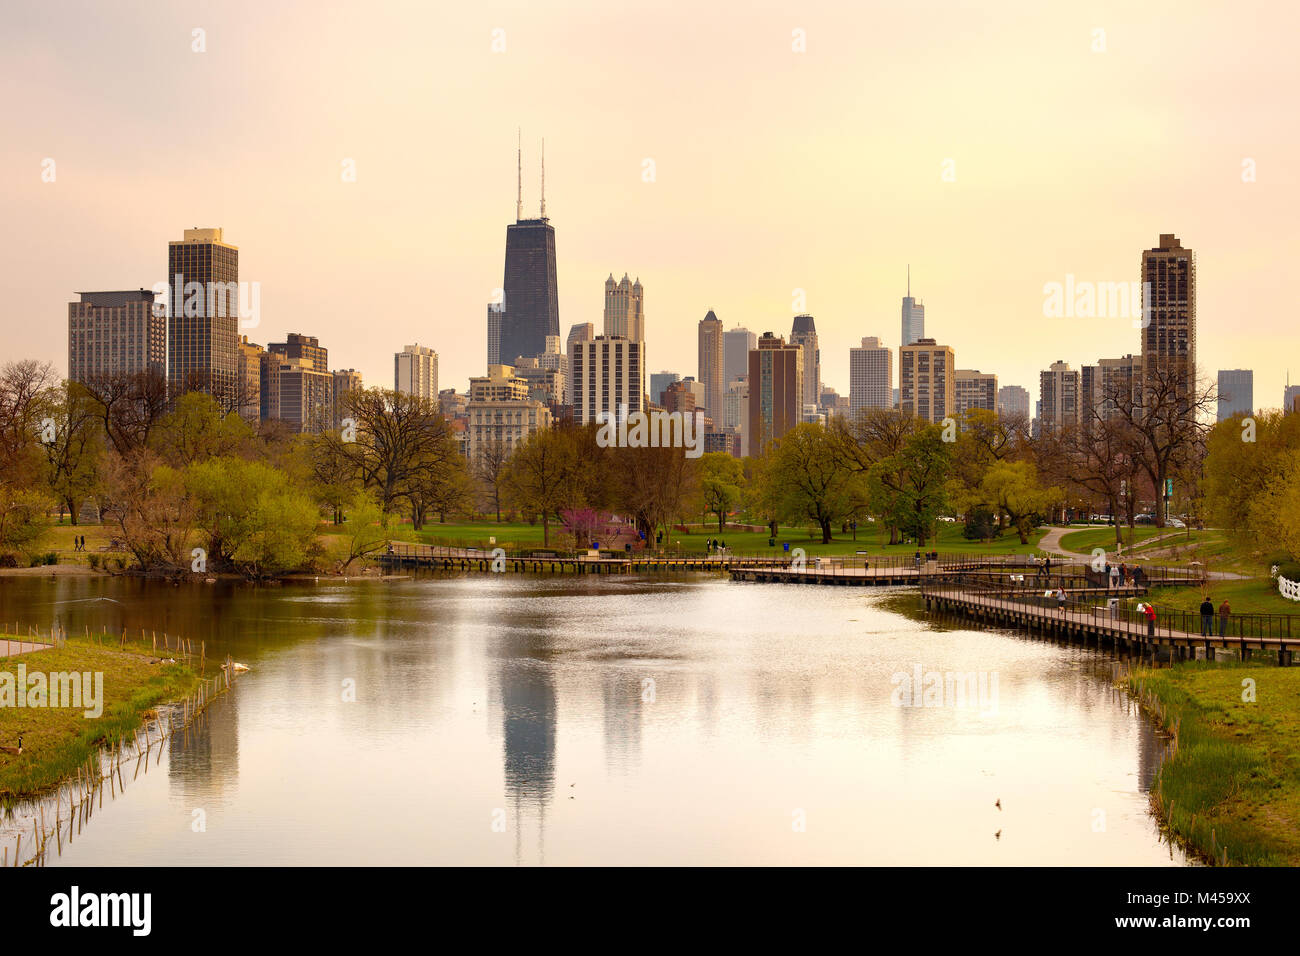 Chicago, Illinois, United States - Downtown skyline and South Pond at Lincoln Park. Stock Photo